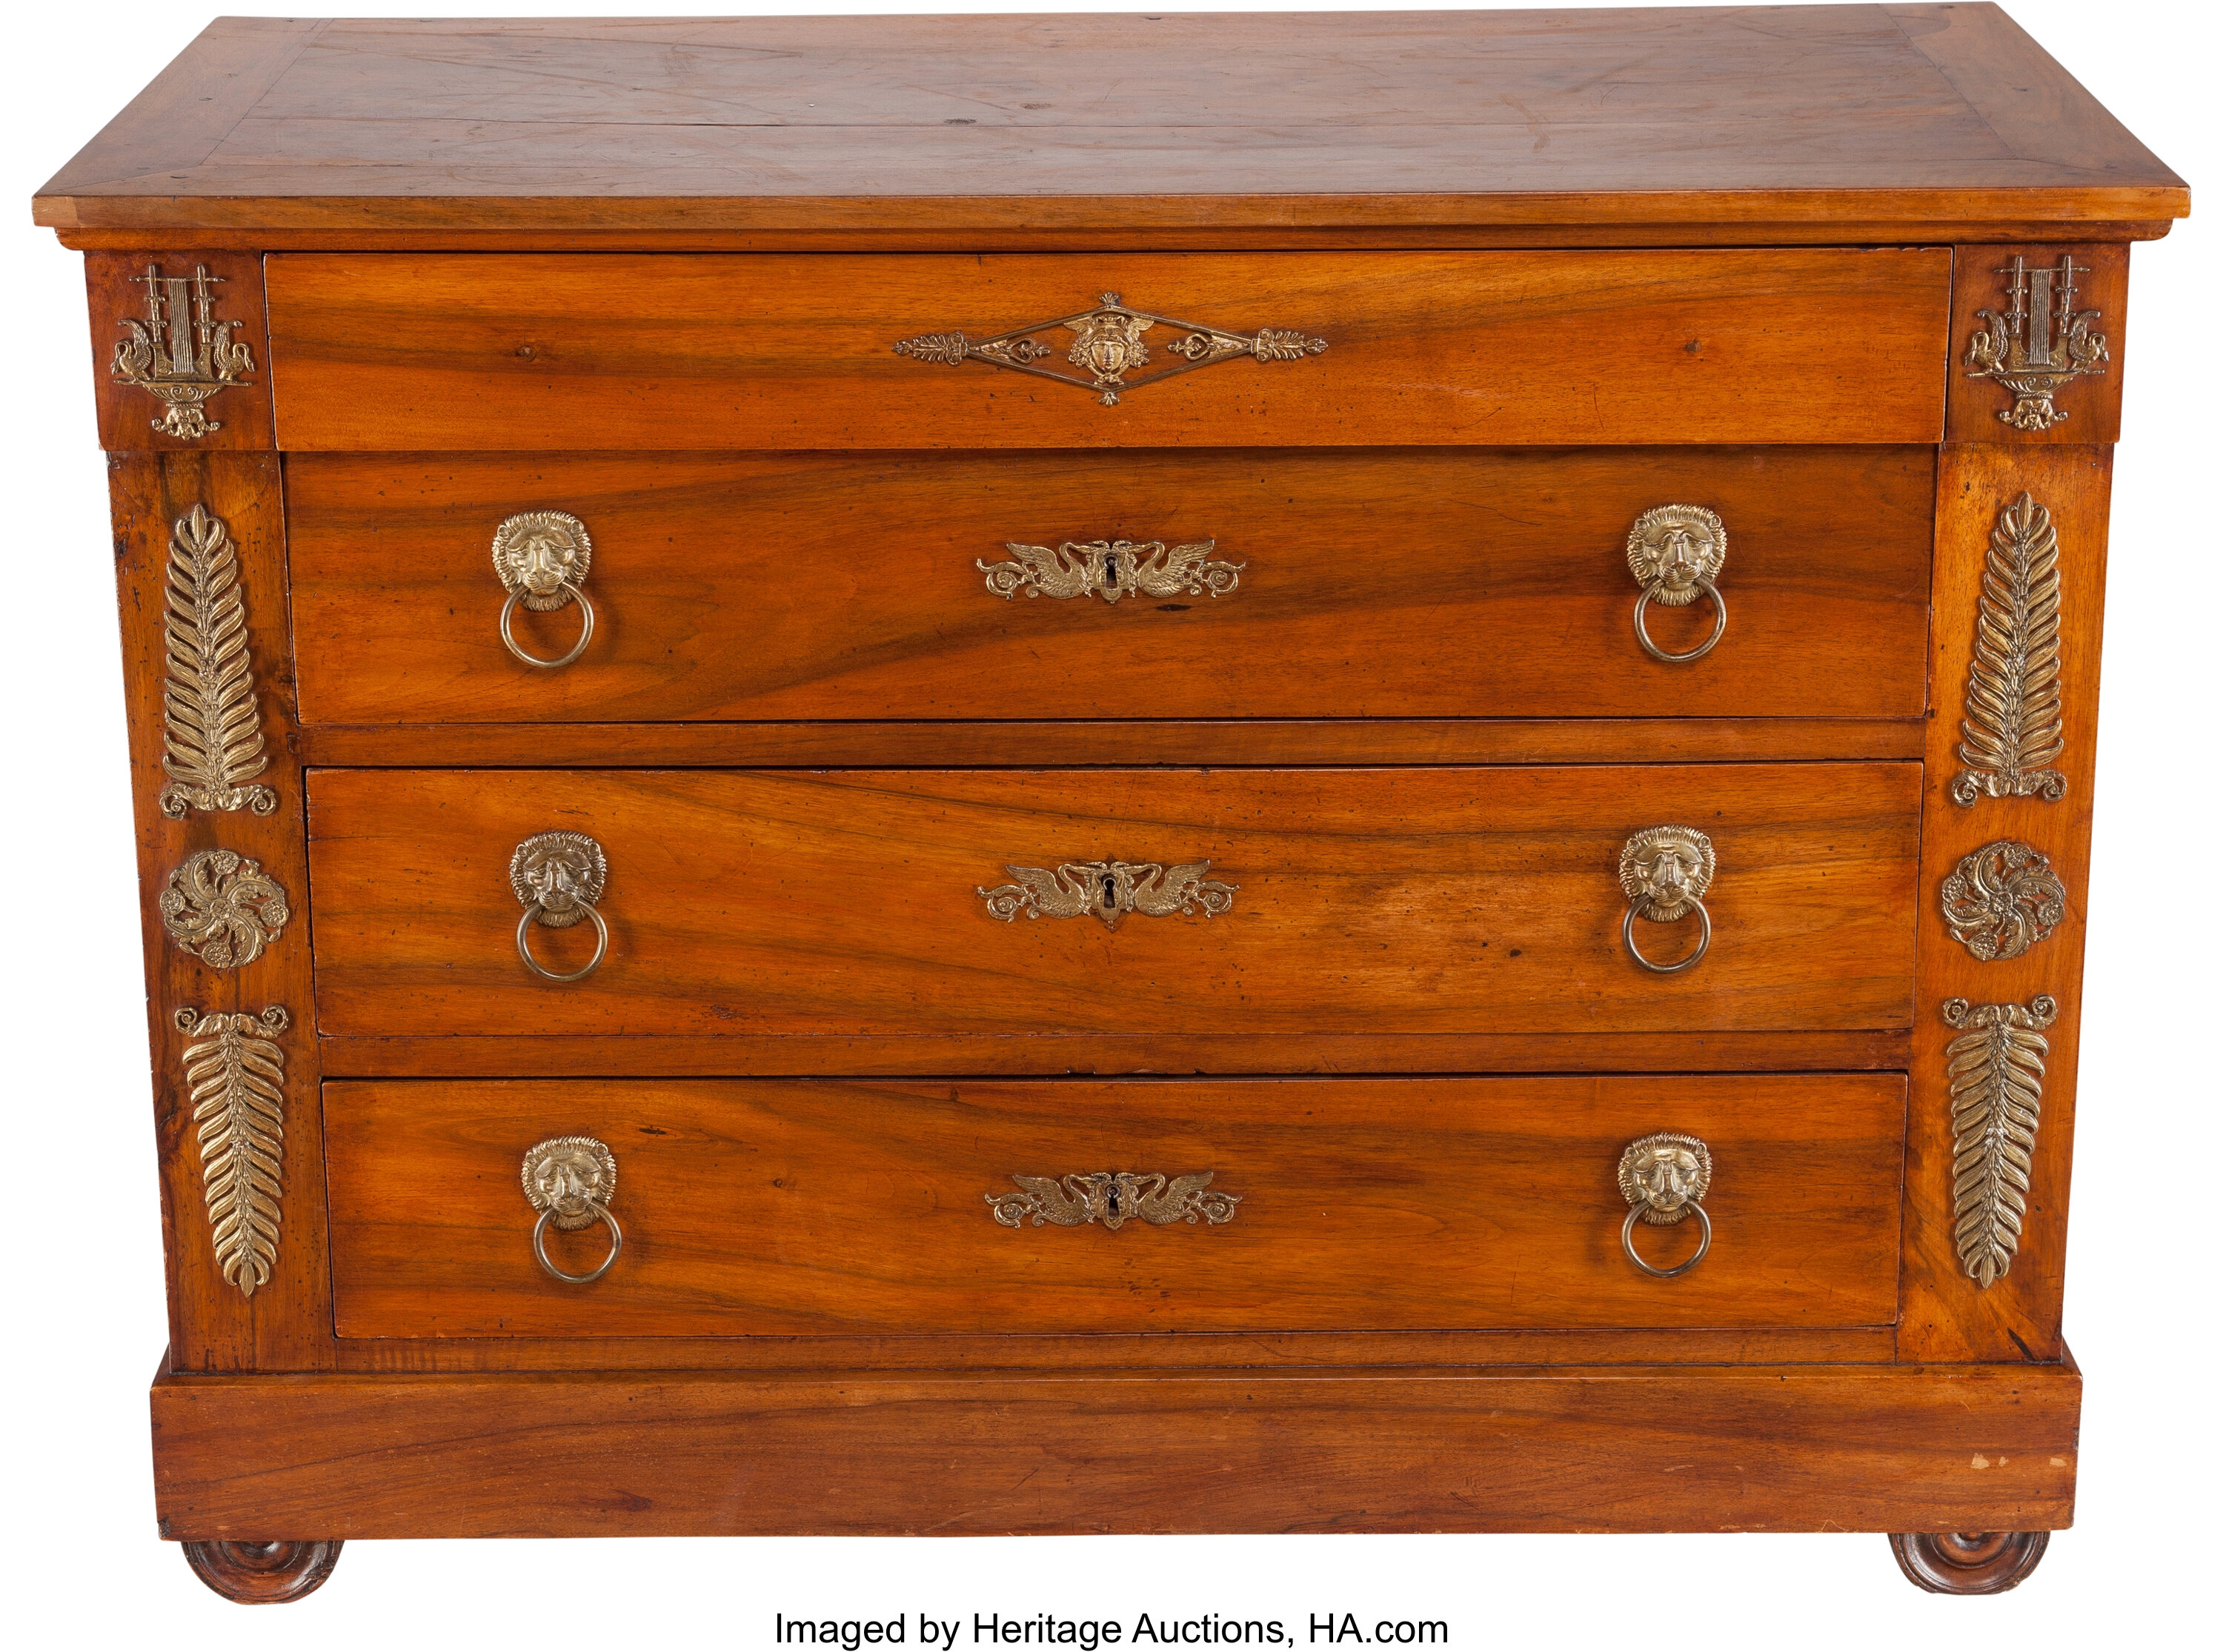 An Empire Style Gilt Bronze Mounted Fruitwood Four Drawer Commode